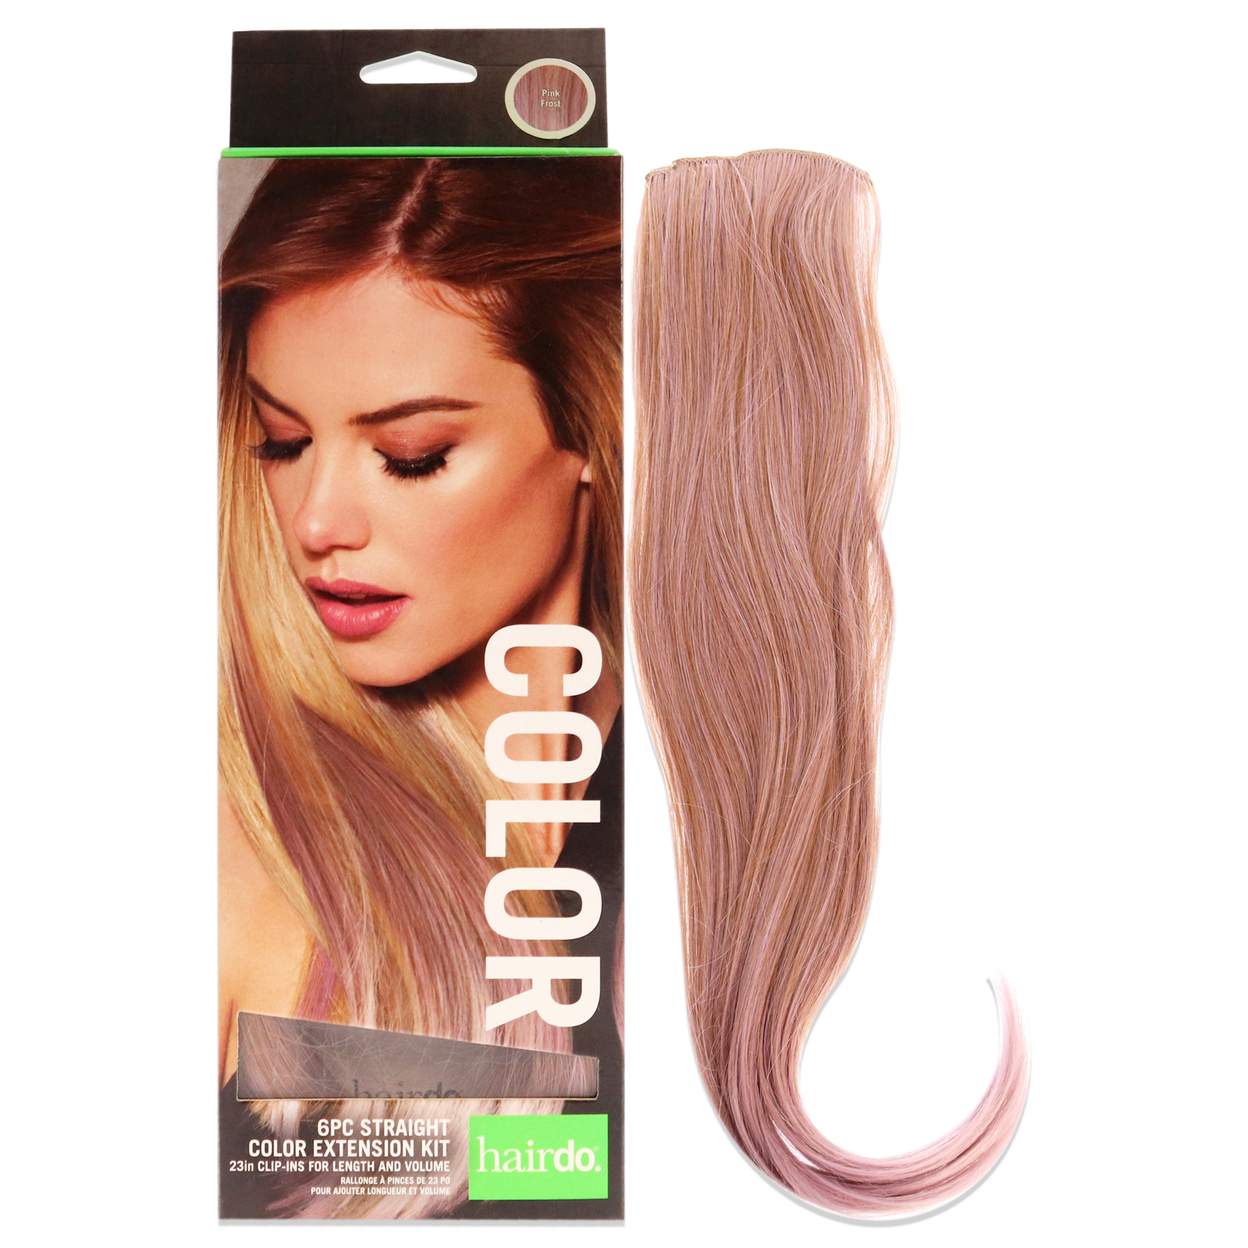 Hairdo Straight Color Extension Kit - Pink Frost Hair Extension 6 X 23 Inch